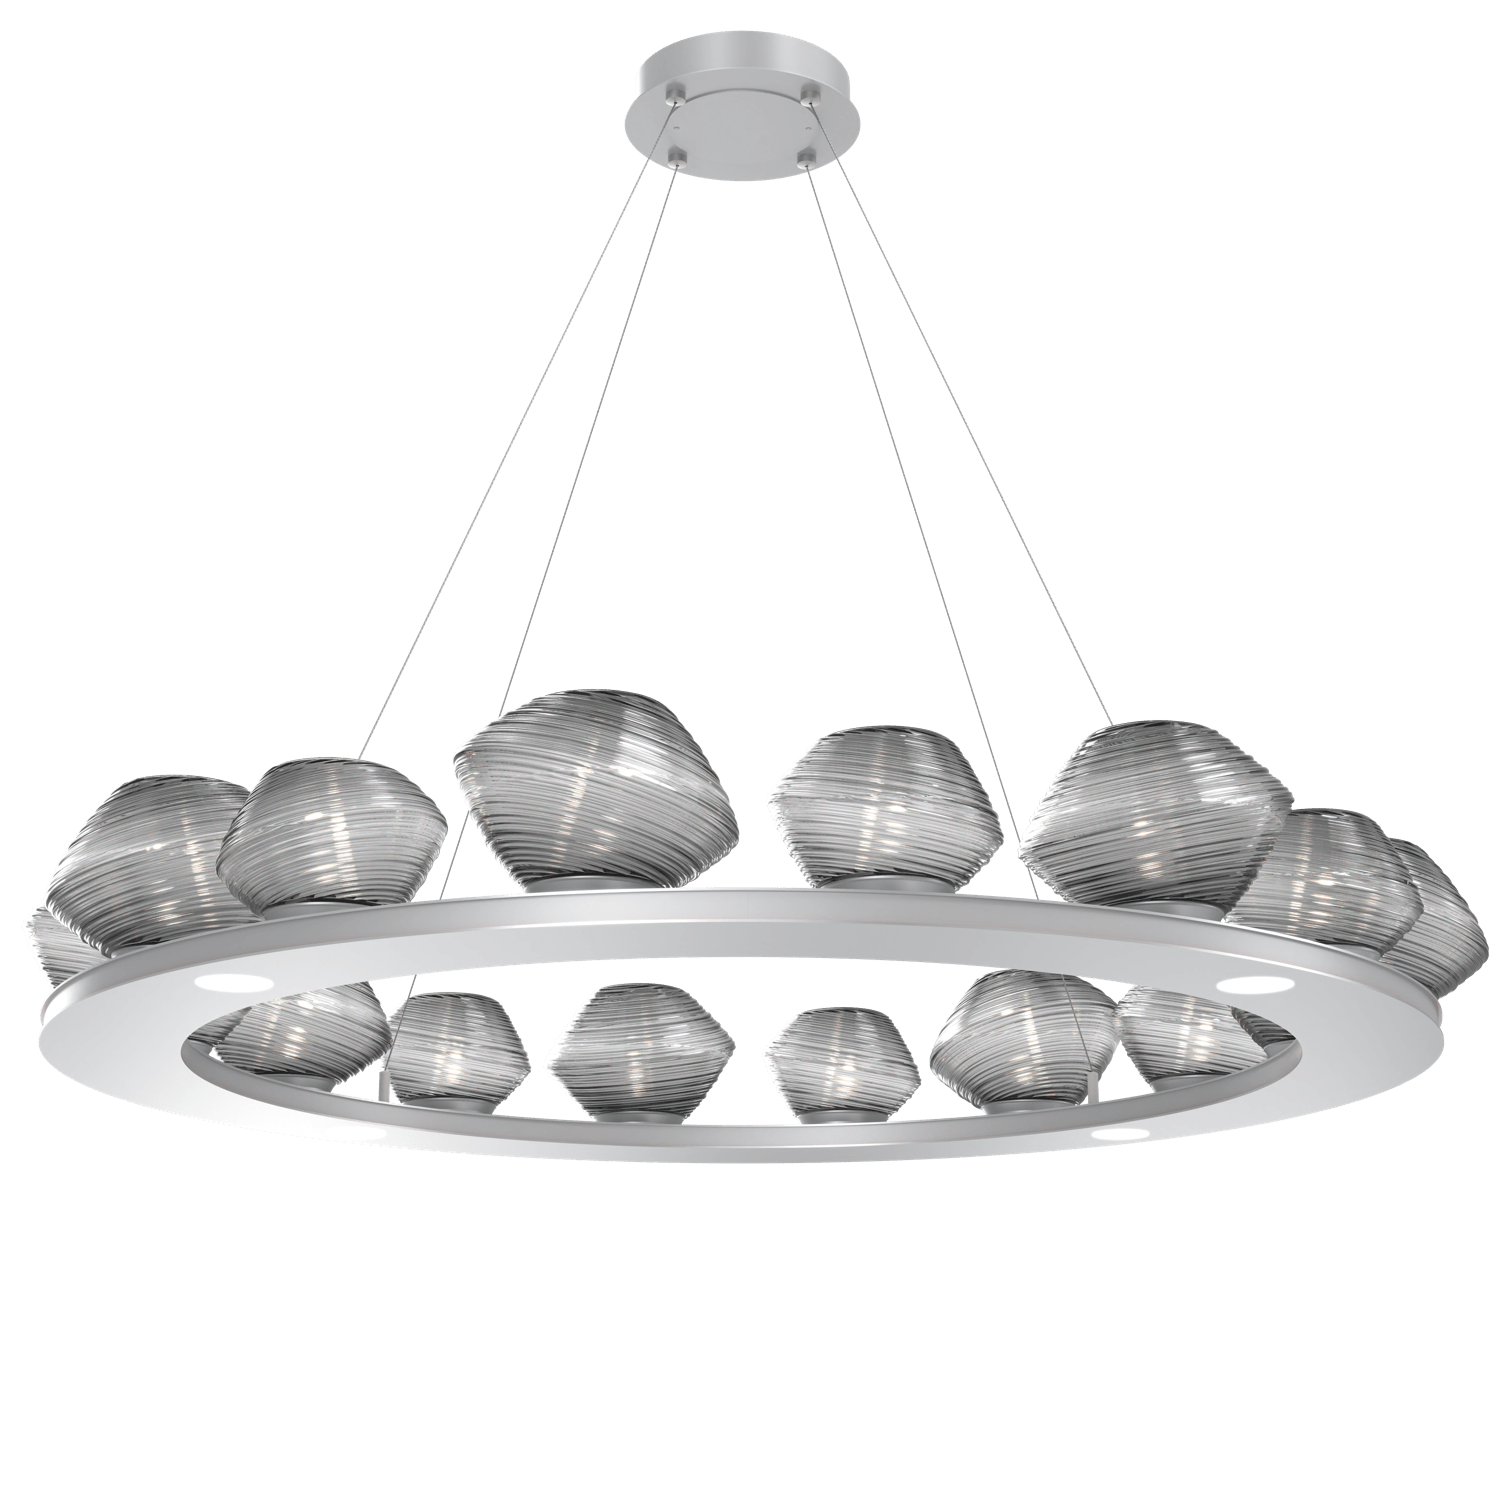 CHB0089-0D-CS-S-Hammerton-Studio-Mesa-48-inch-ring-chandelier-with-classic-silver-finish-and-smoke-blown-glass-shades-and-LED-lamping